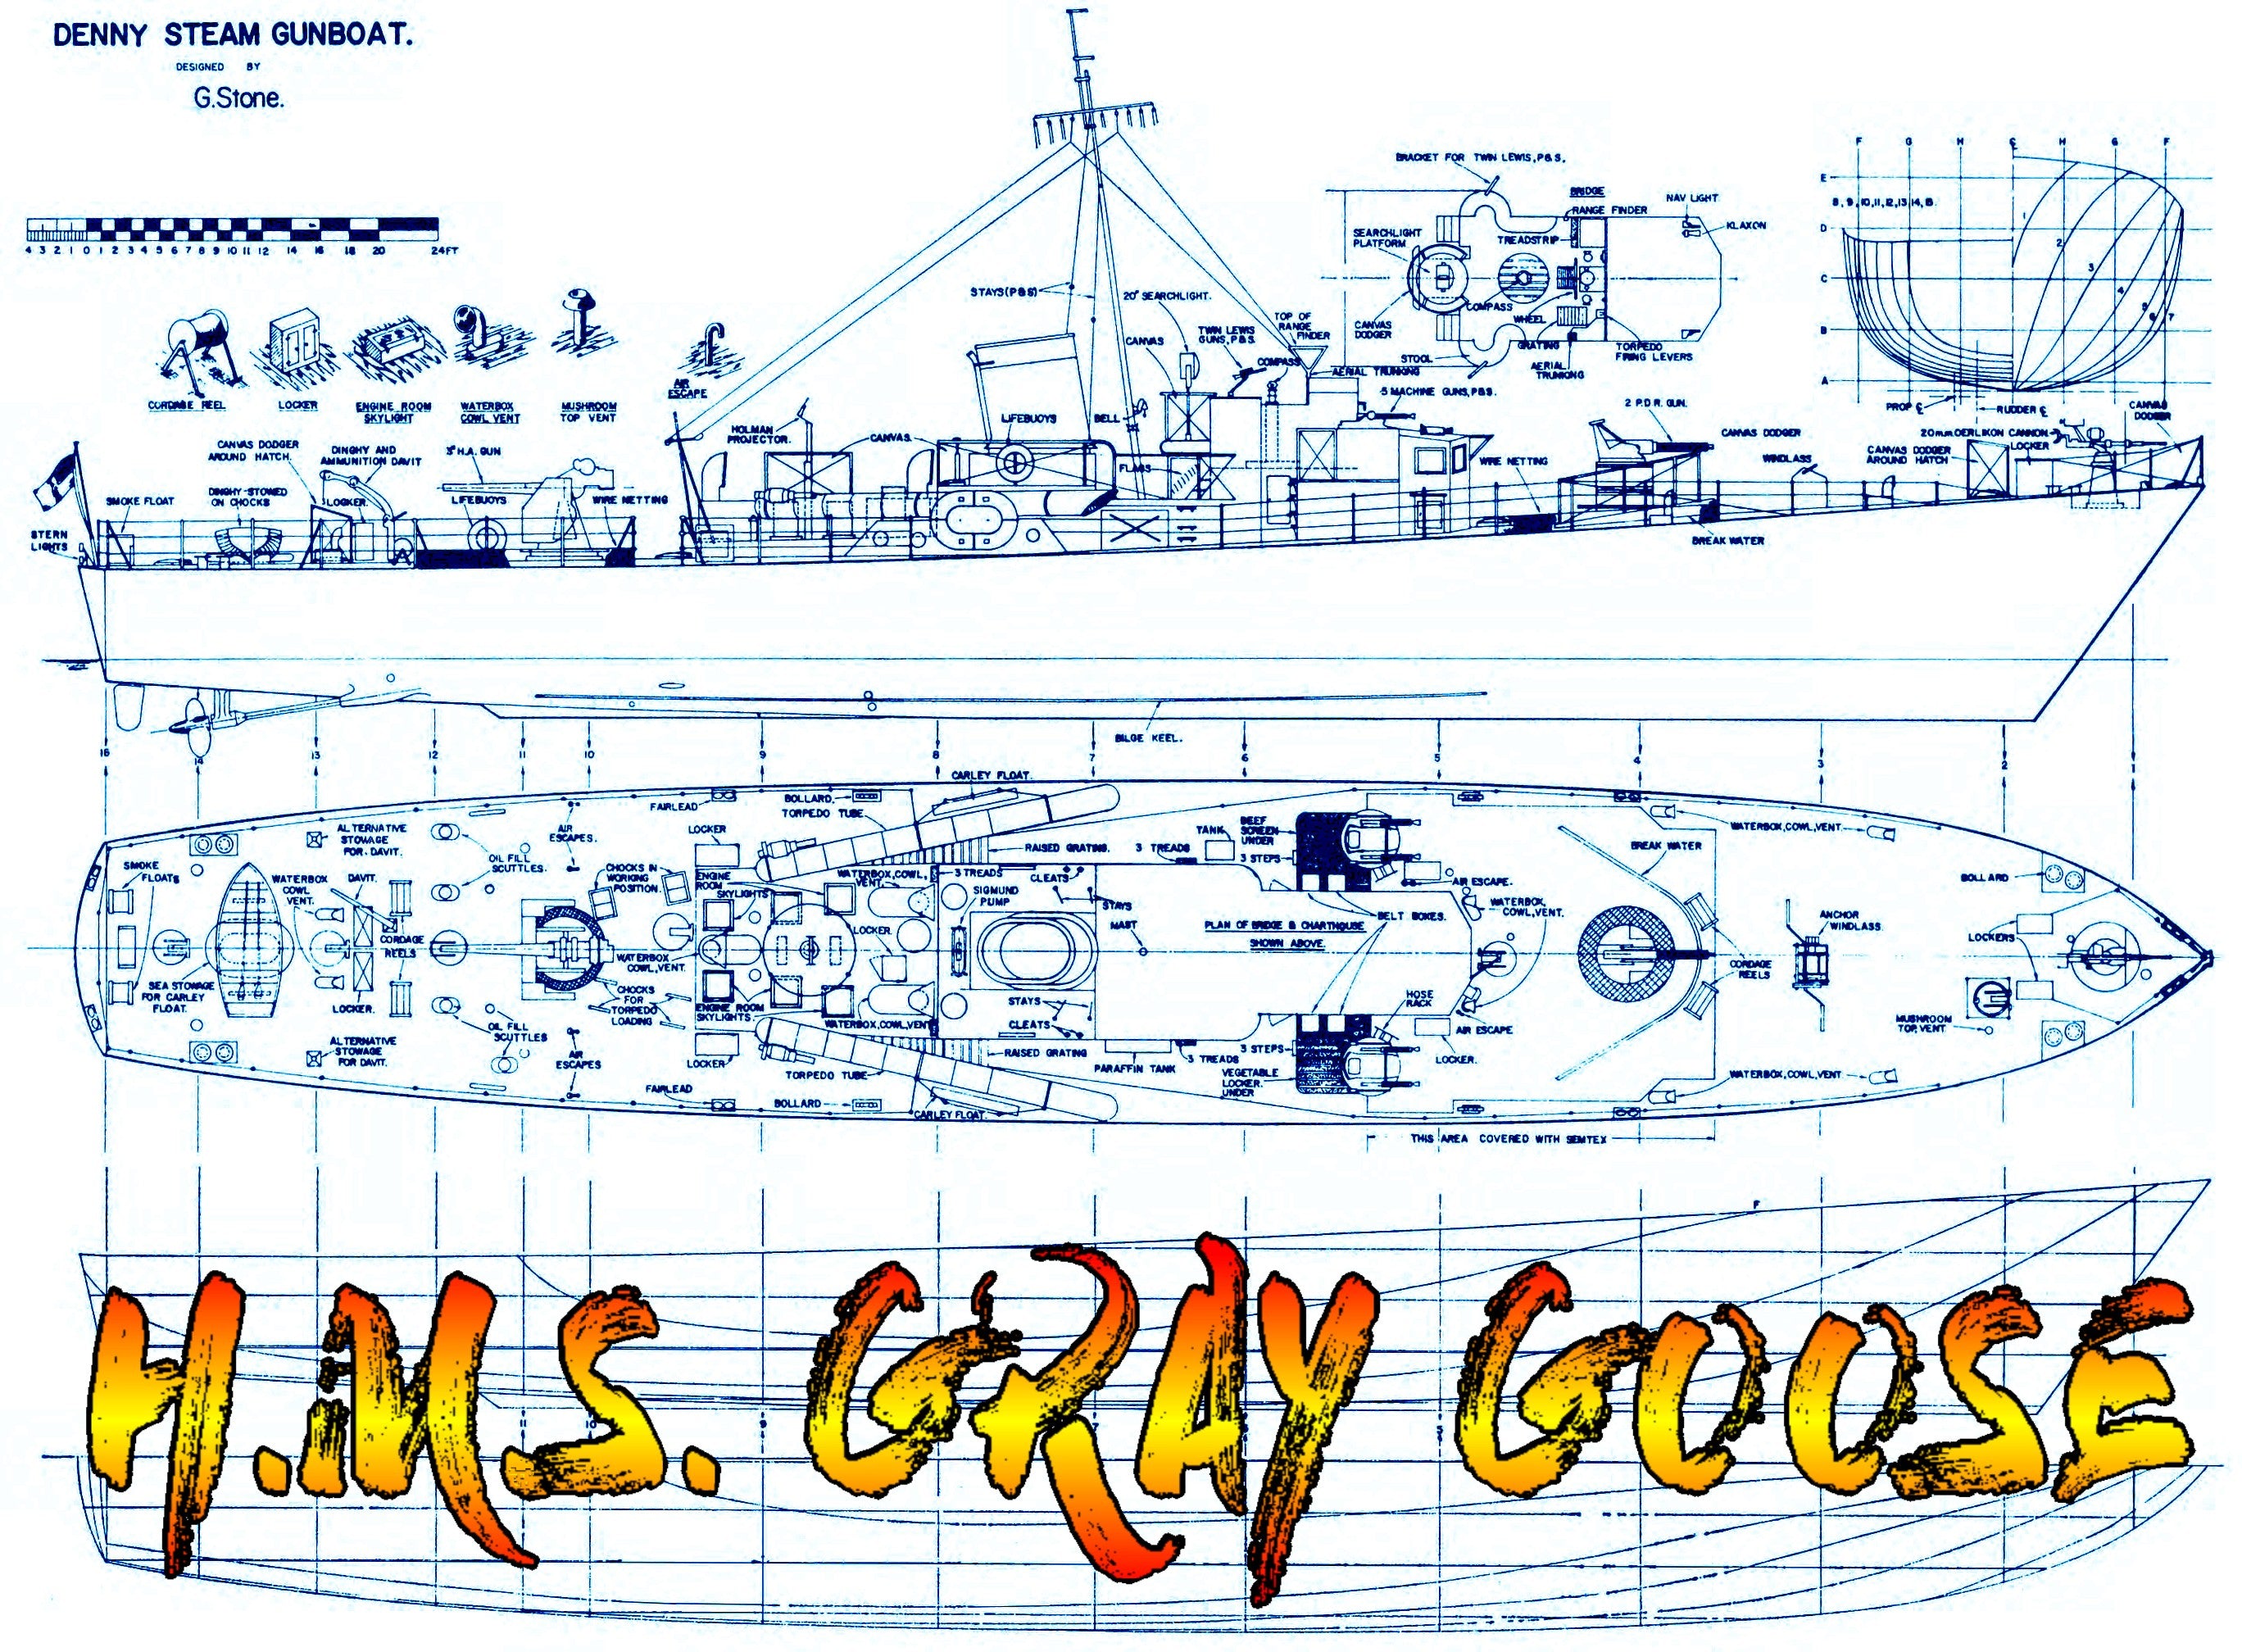 full size printed 1:48 denny type steam gunboat plan & article suitable for radio control